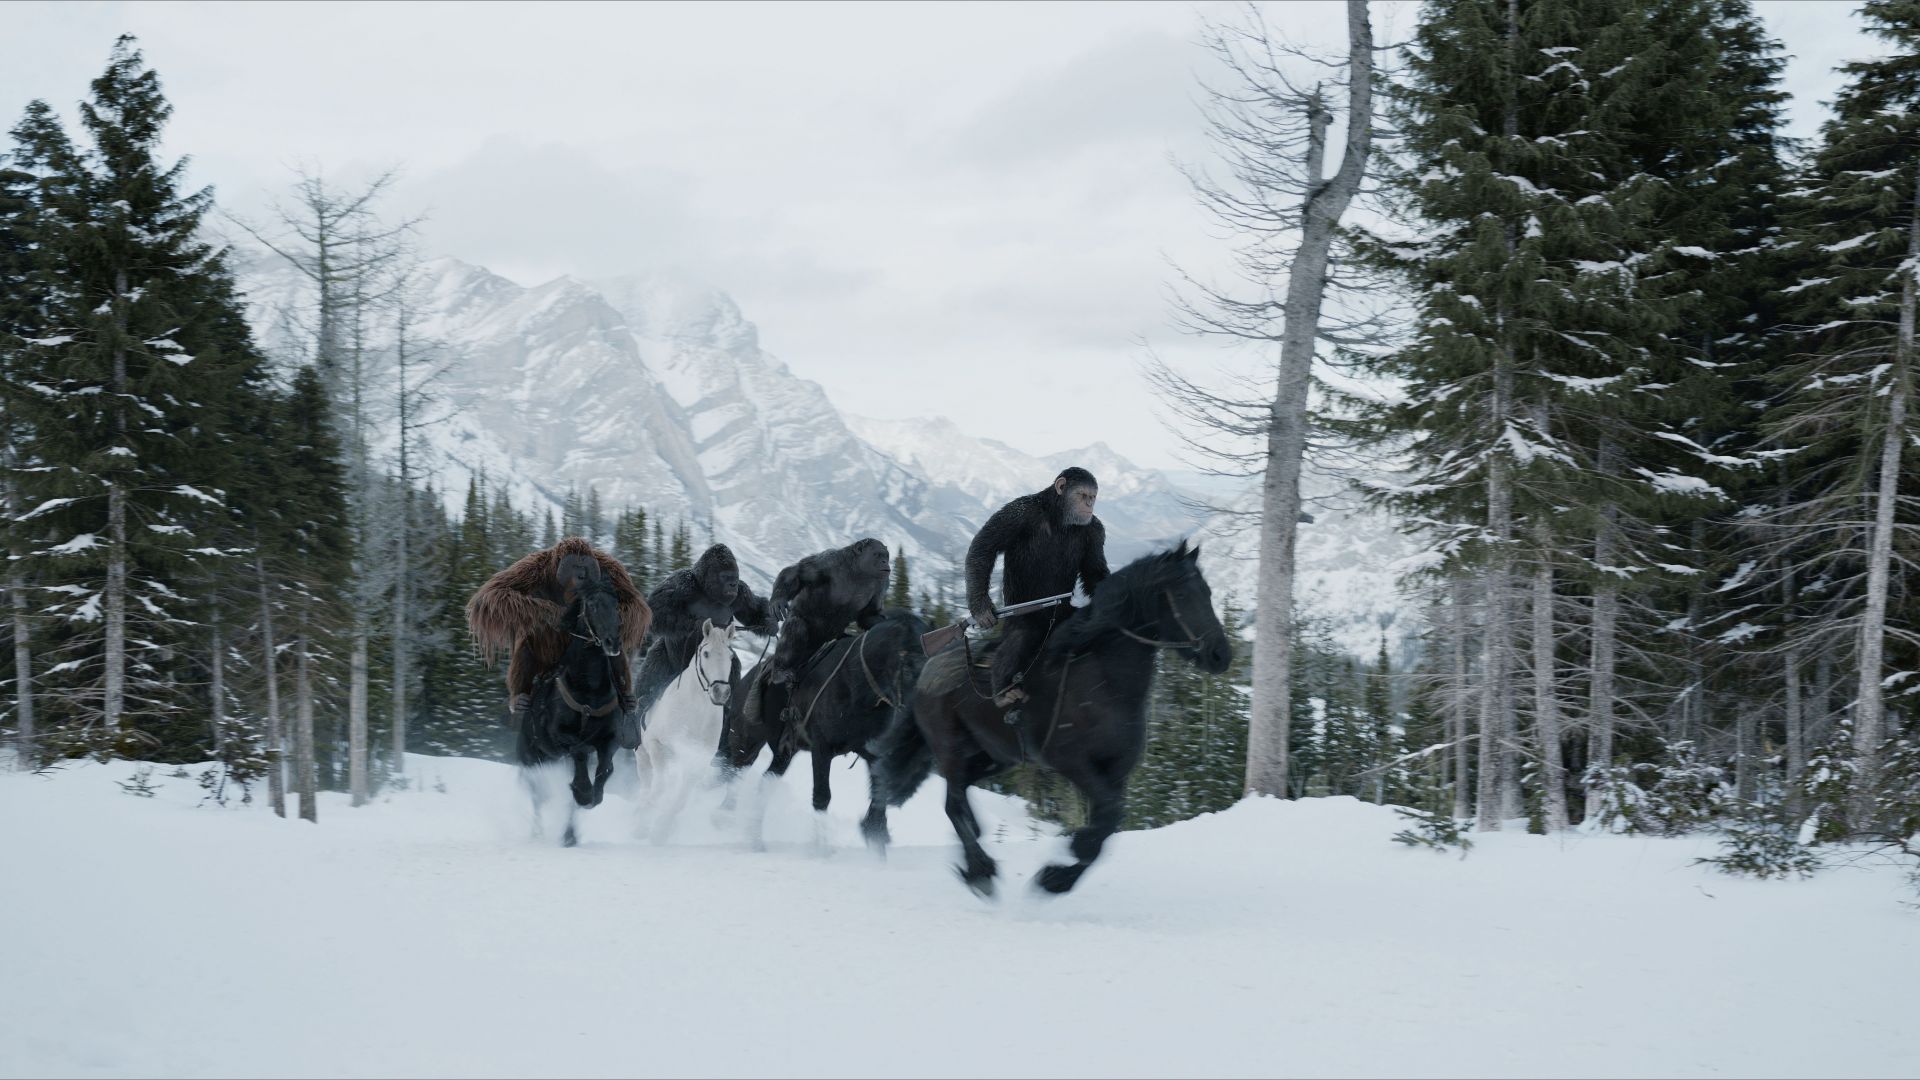 Wallpaper 2017 movie, War for the planet of the apes, horse riding, 4k